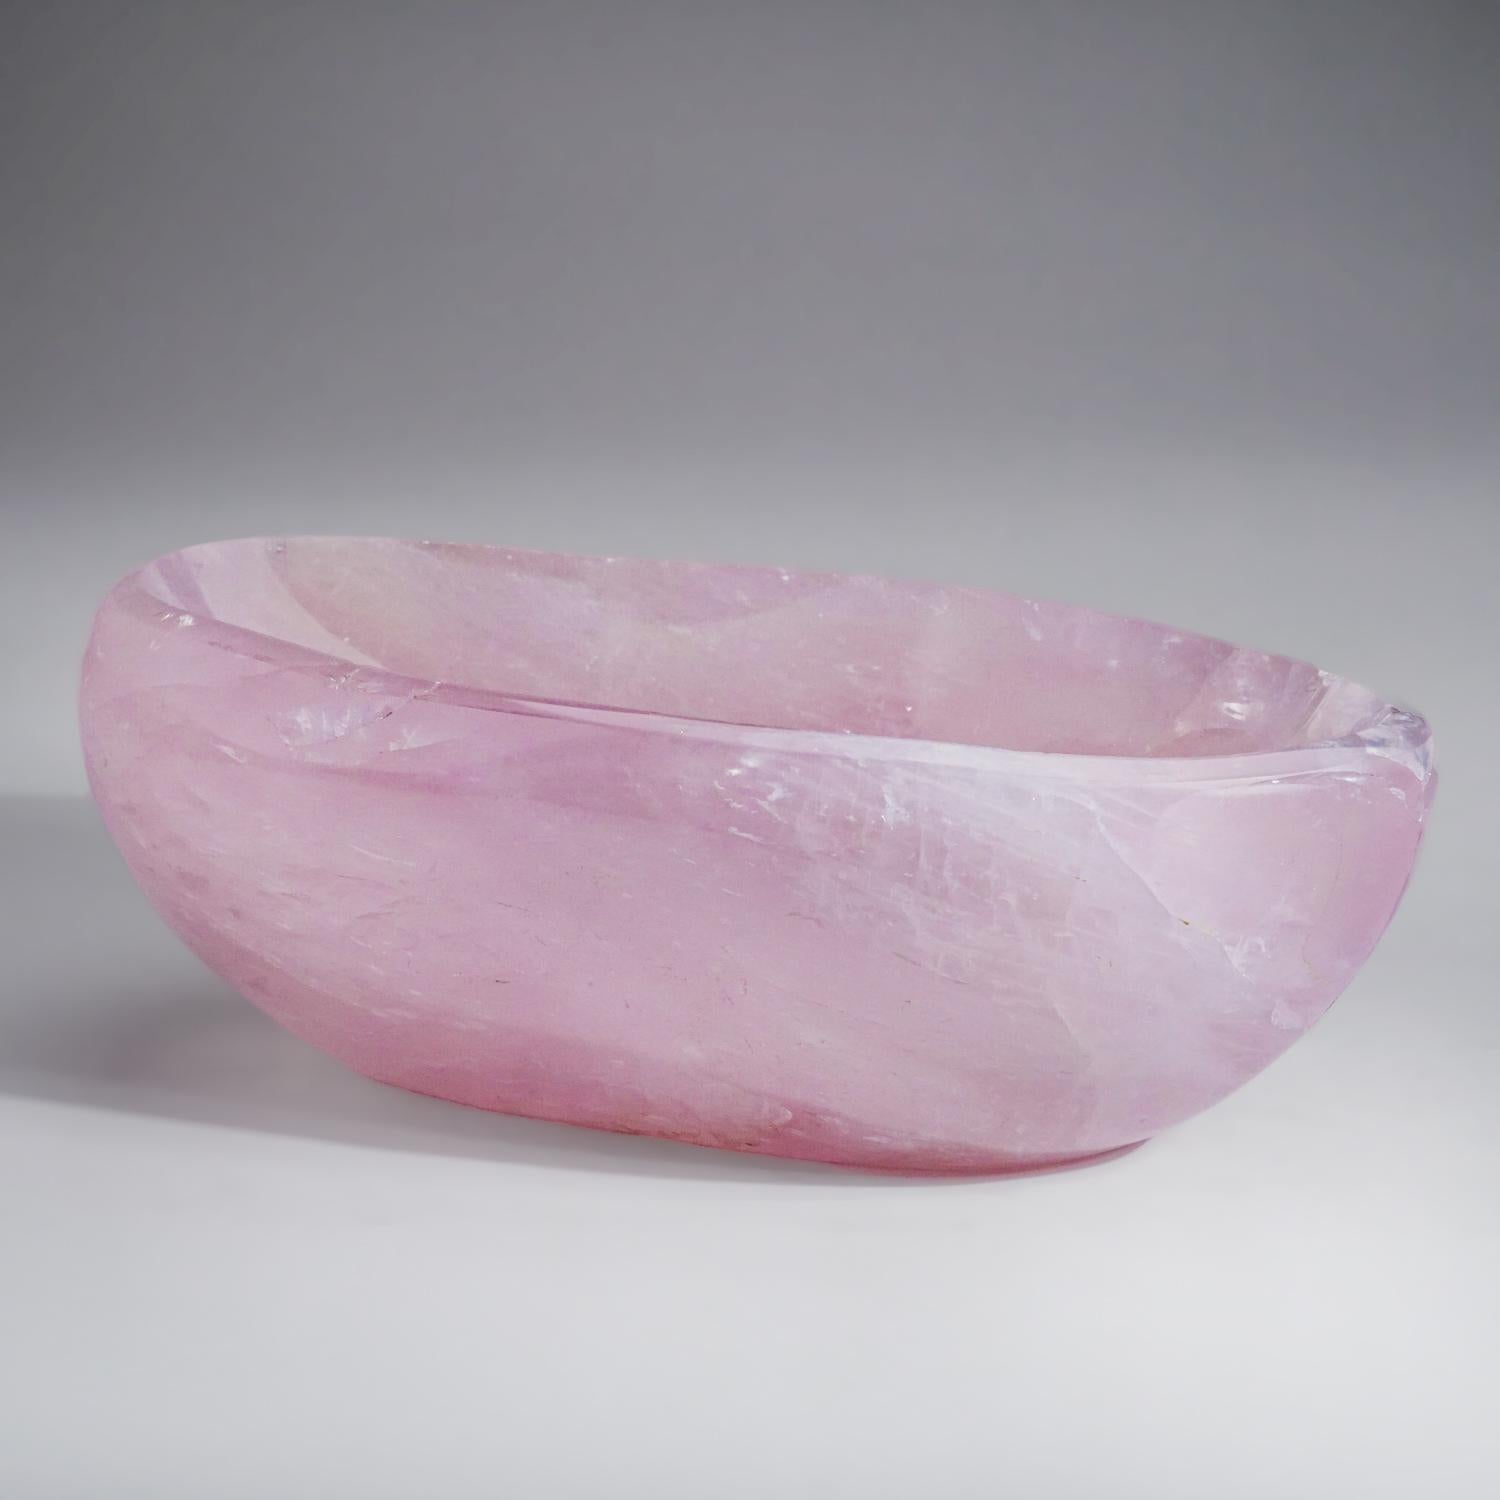 Handmade polished free-form bowl of natural gem translucent rose quartz from Brazil. All sides hand polished to a smooth mirror finish. This will make a beautiful centerpiece to complement your home.

Rose Quartz is the stone of unconditional